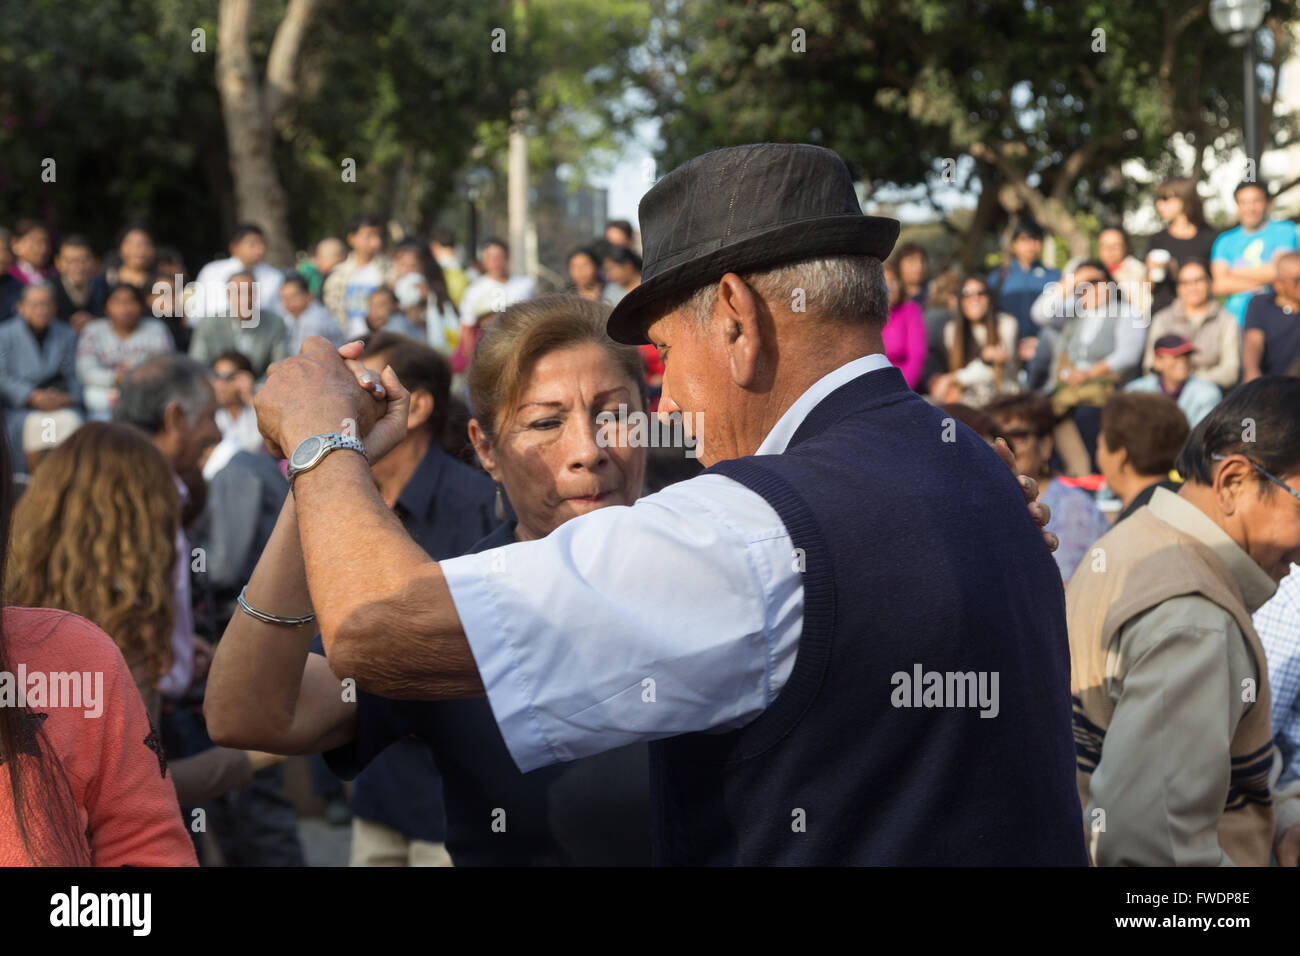 Lima, Peru - August 29, 2015: People at the public Saturday Salsa dancing event in Parque Kennedy in Miraflores district. Stock Photo